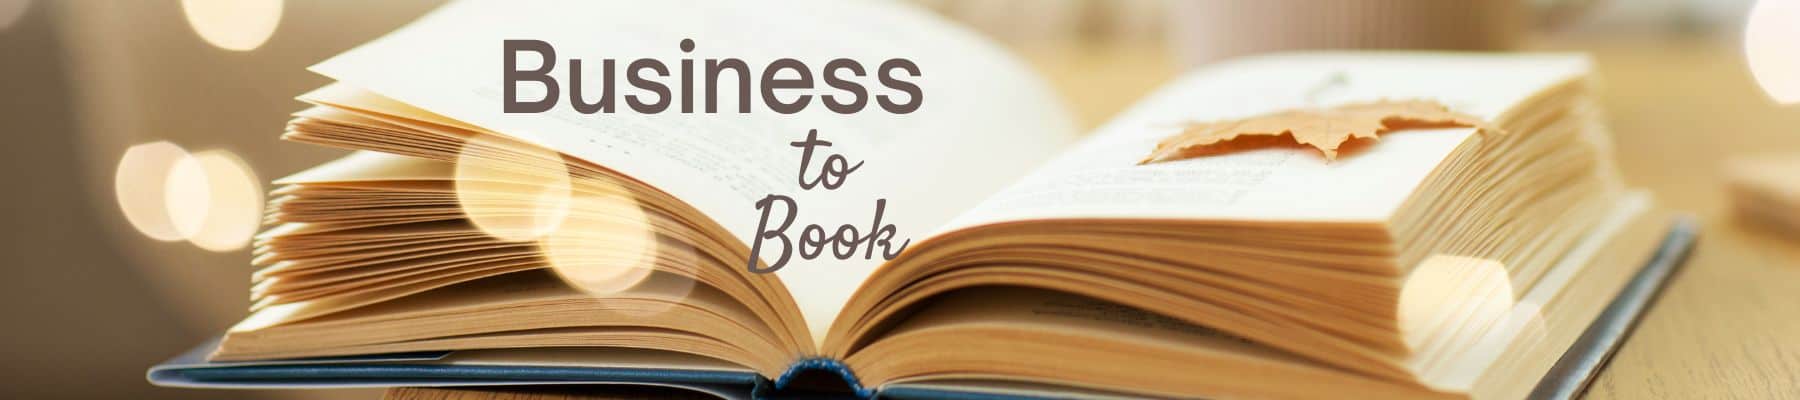 Business to Book